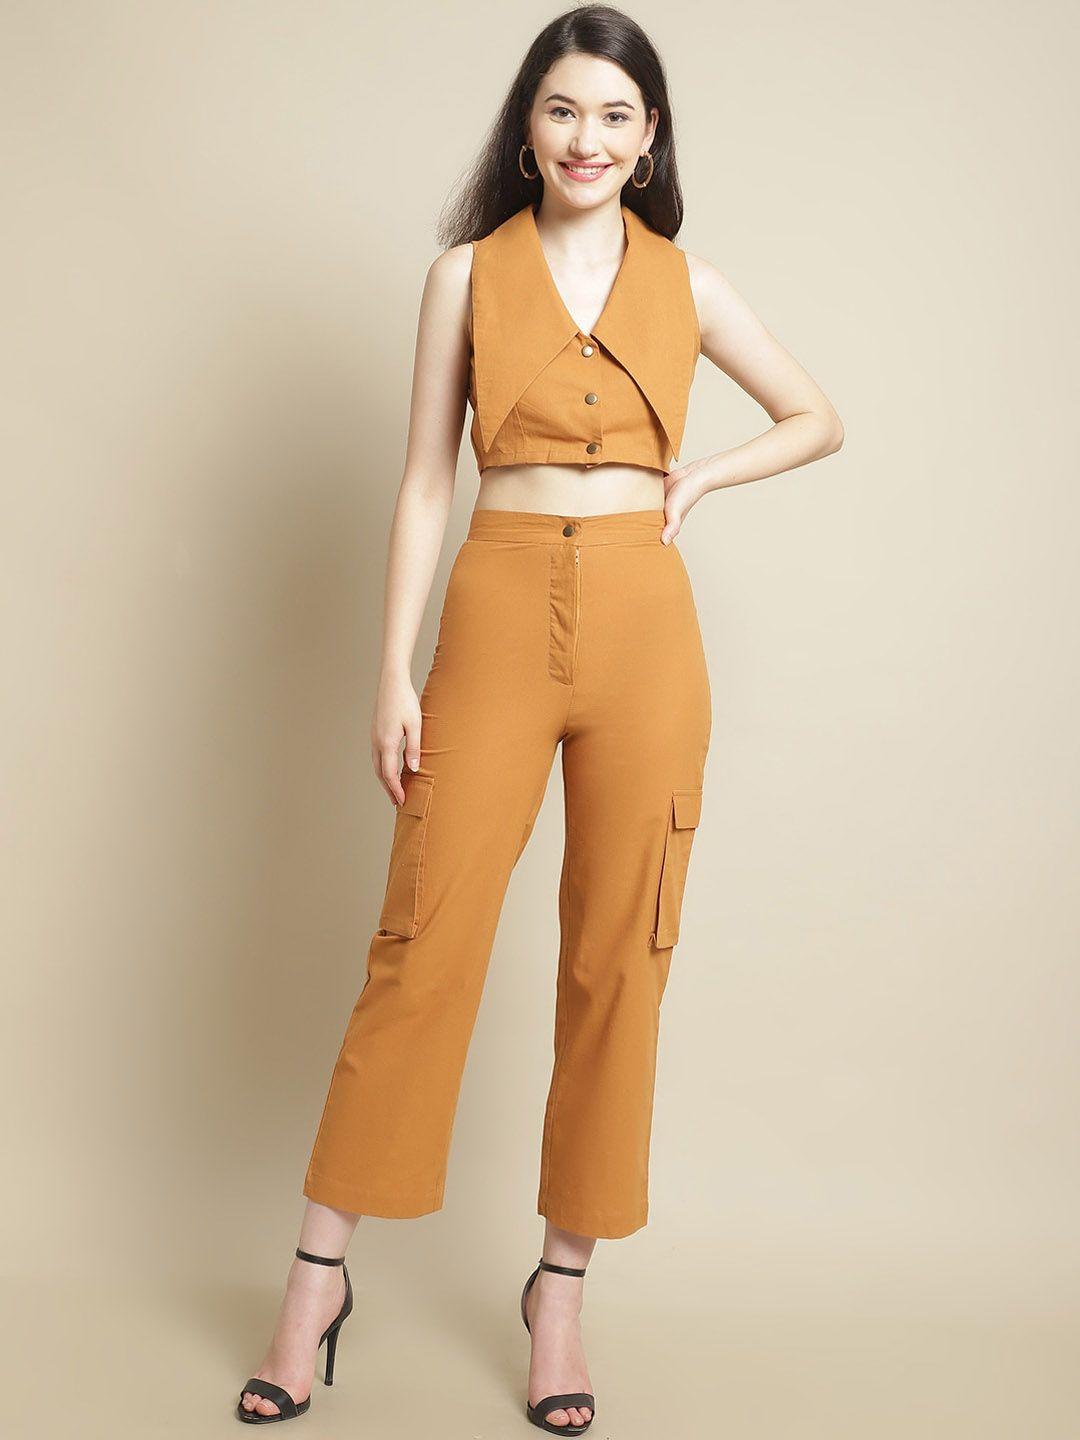 blanc9 shawl neck crop top with trousers